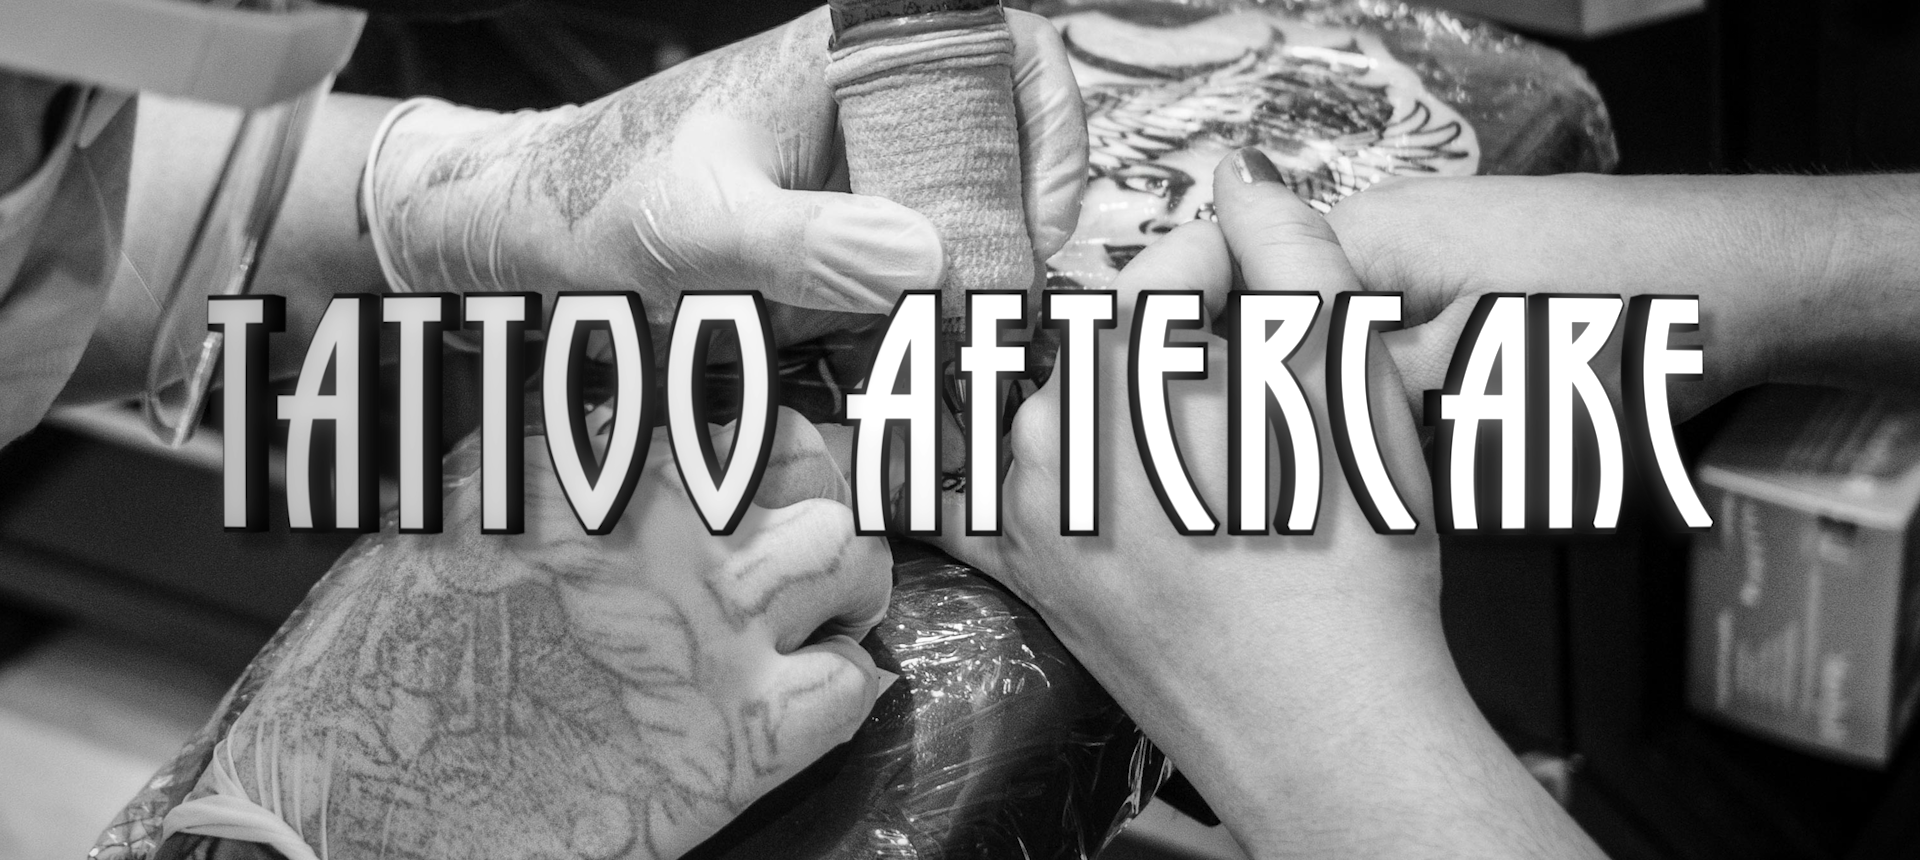 Tattoo-Nachsorge bei Live By The Sword Tattoo NYC